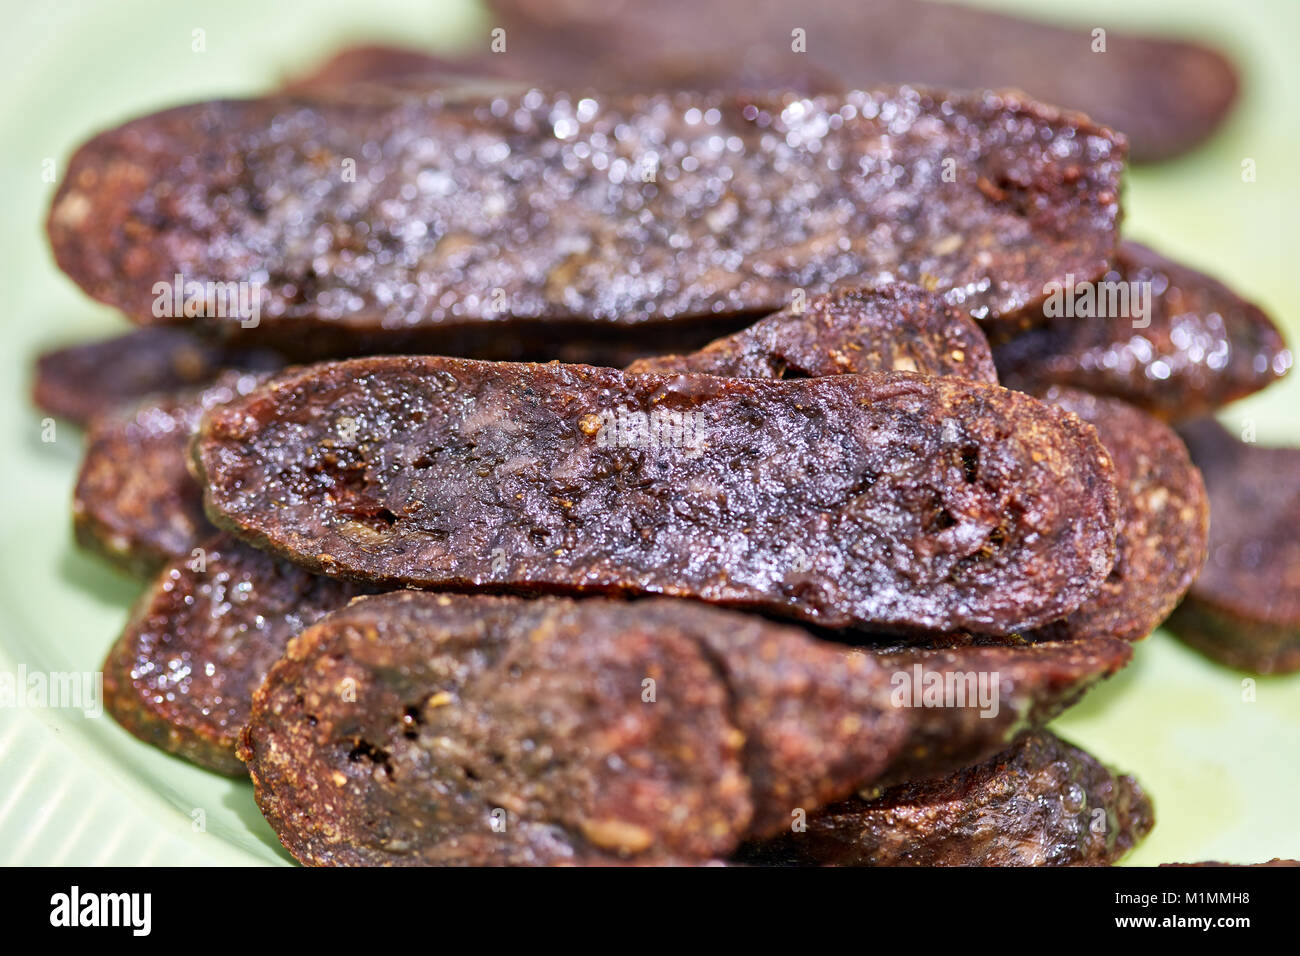 Turkish göden sausage sliced and grilled in closeup Stock Photo